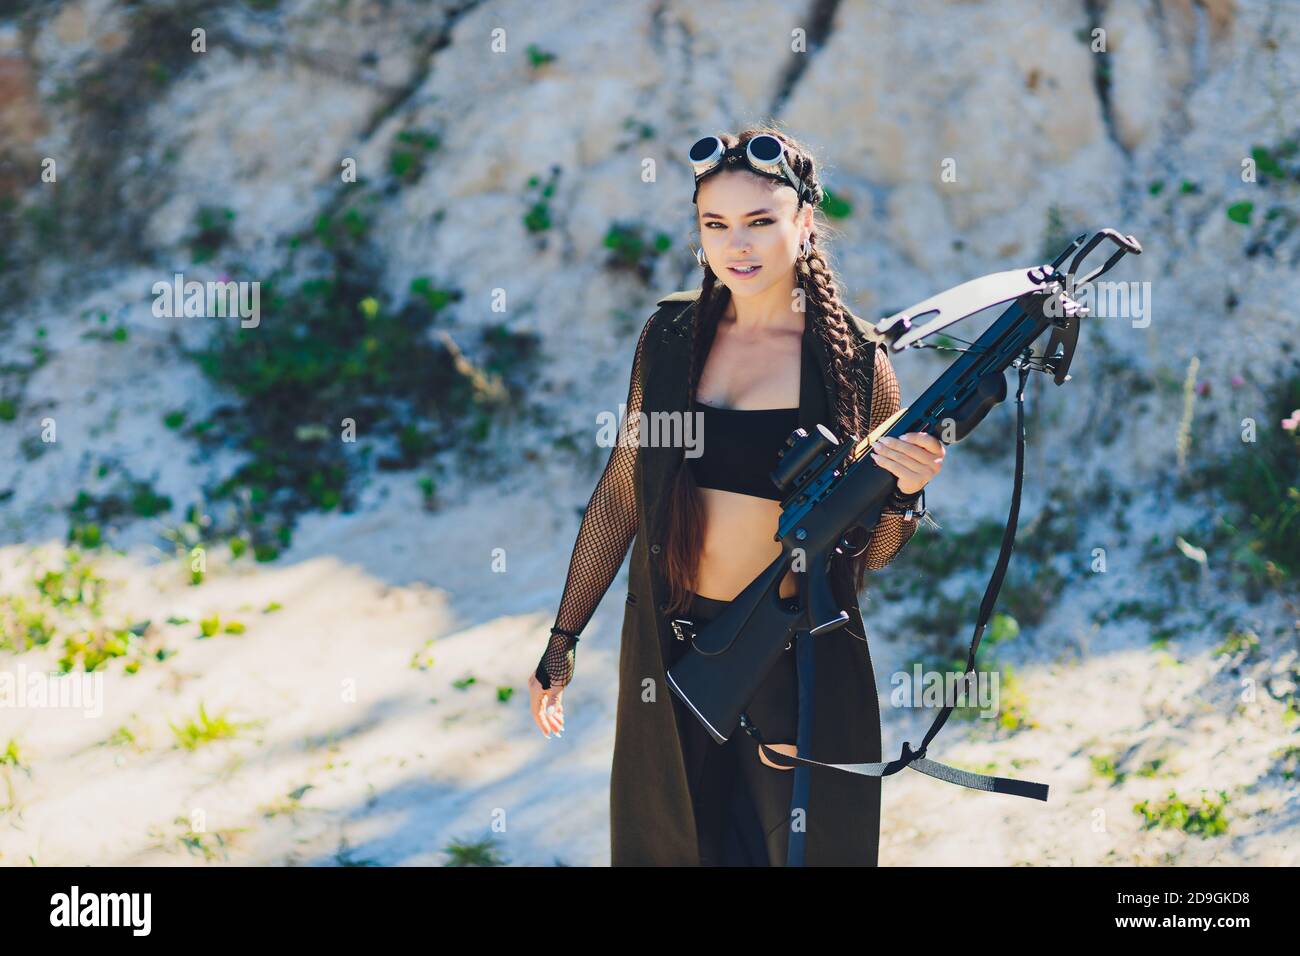 Athlete aiming Young woman holding the crossbow Stock Photo - Alamy